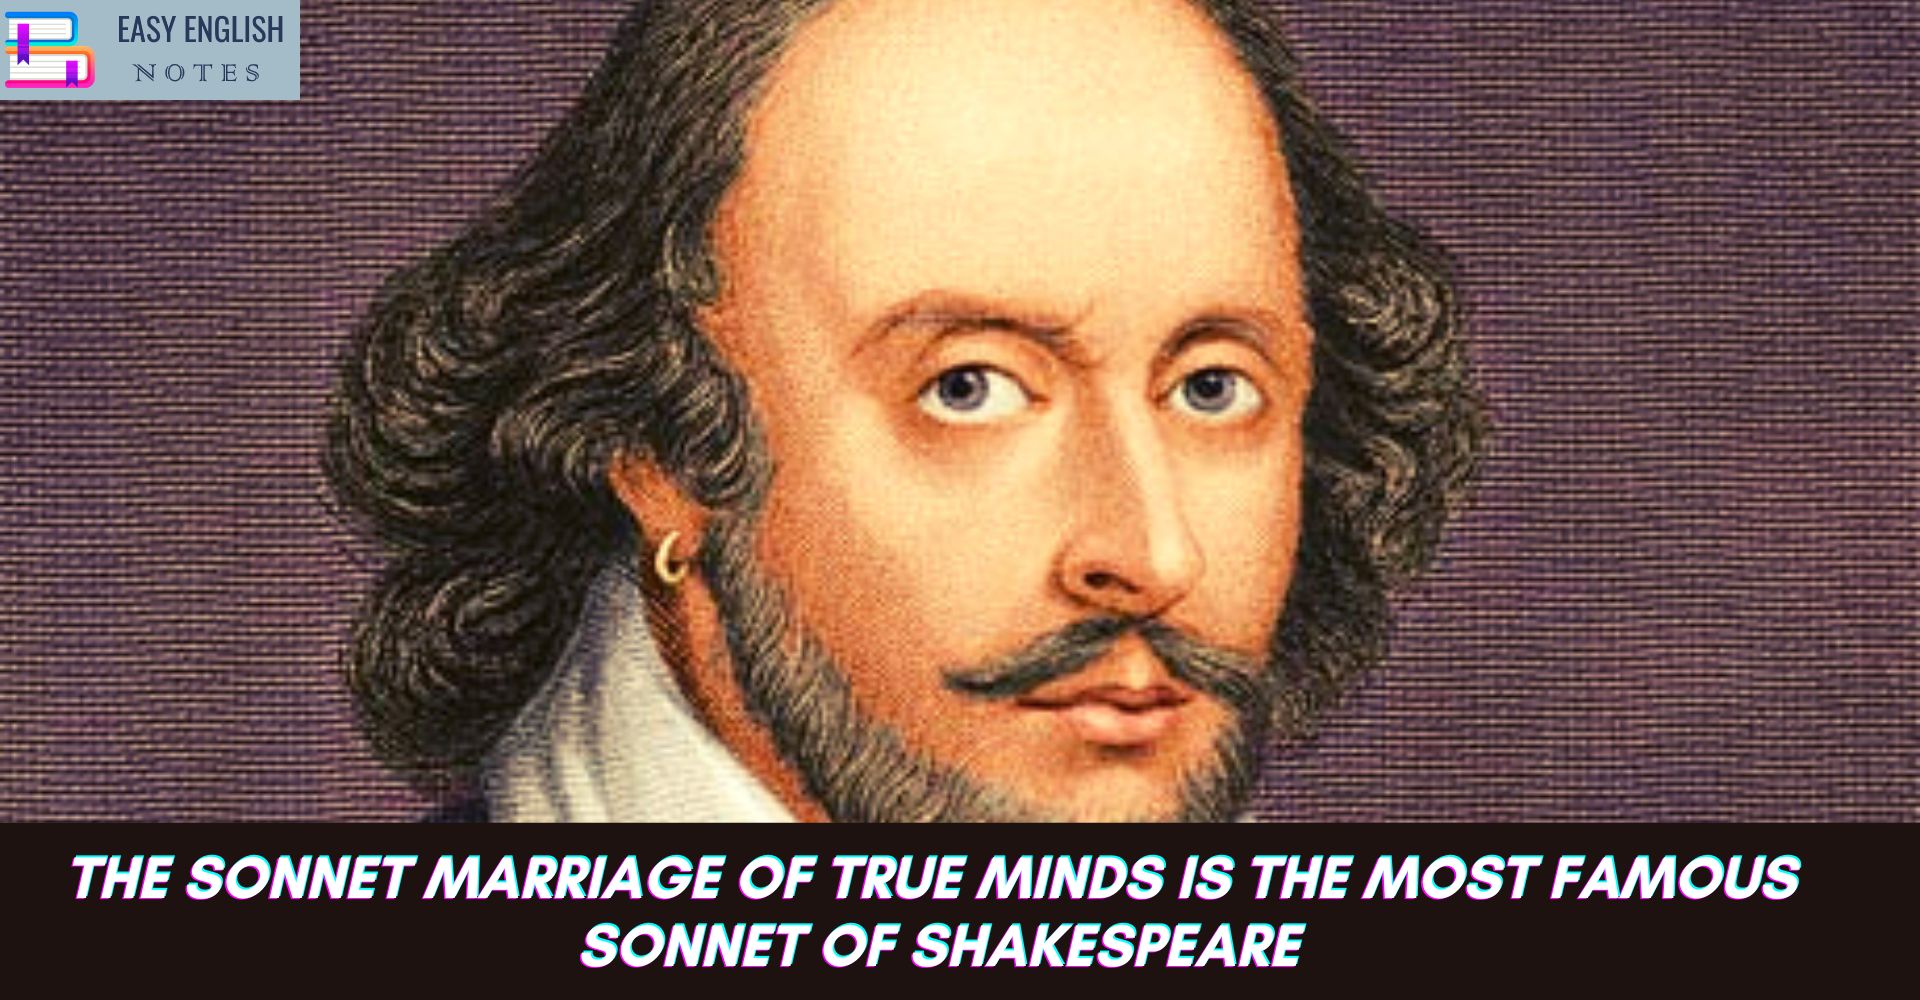 The sonnet Marriage of True Minds is the most famous sonnet of Shakespeare